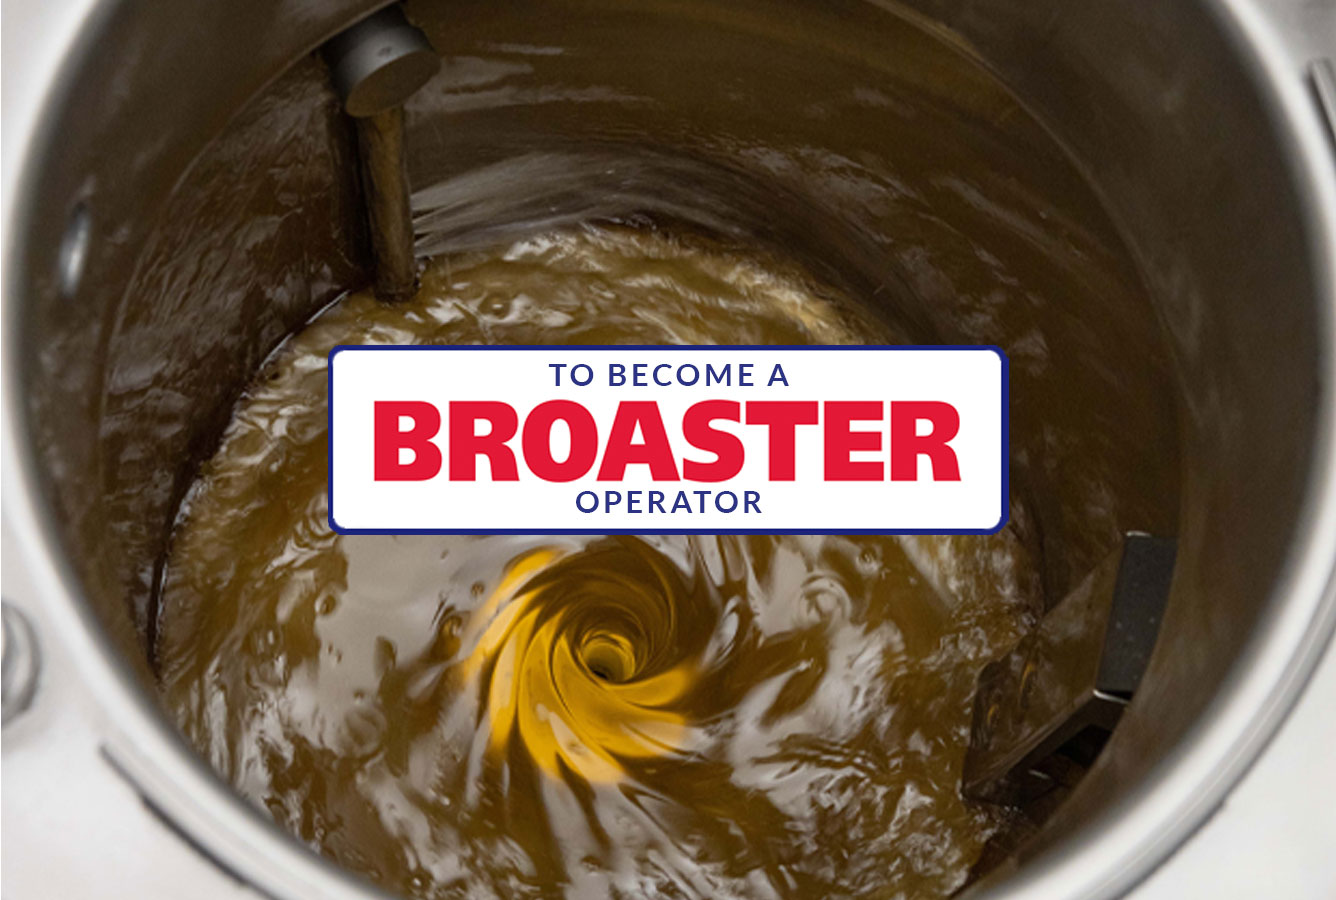 What is Broaster: Manufacturer of innovative kitchen equipment